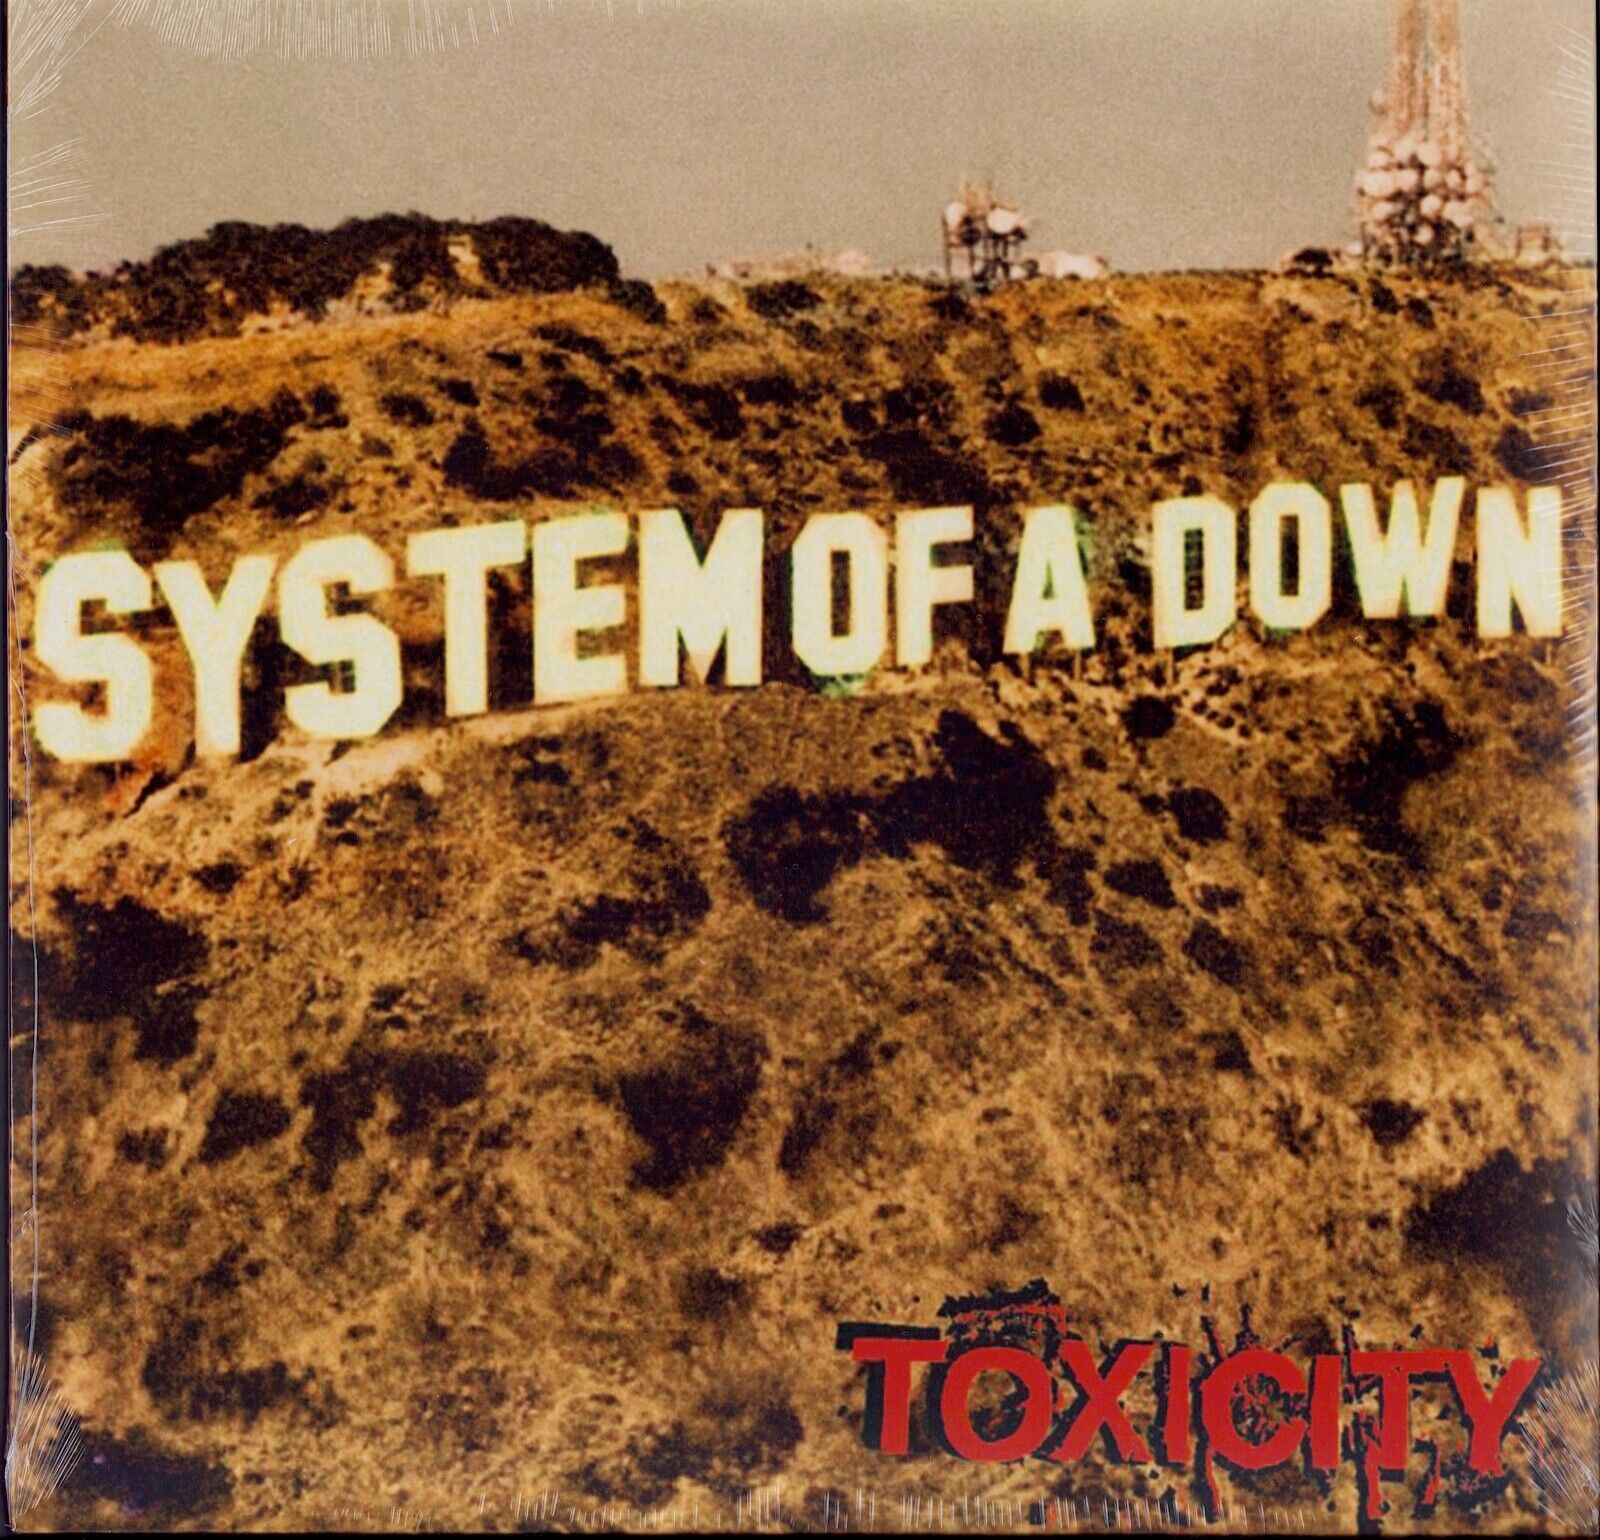 System Of A Down ‎- Toxicity Vinyl LP